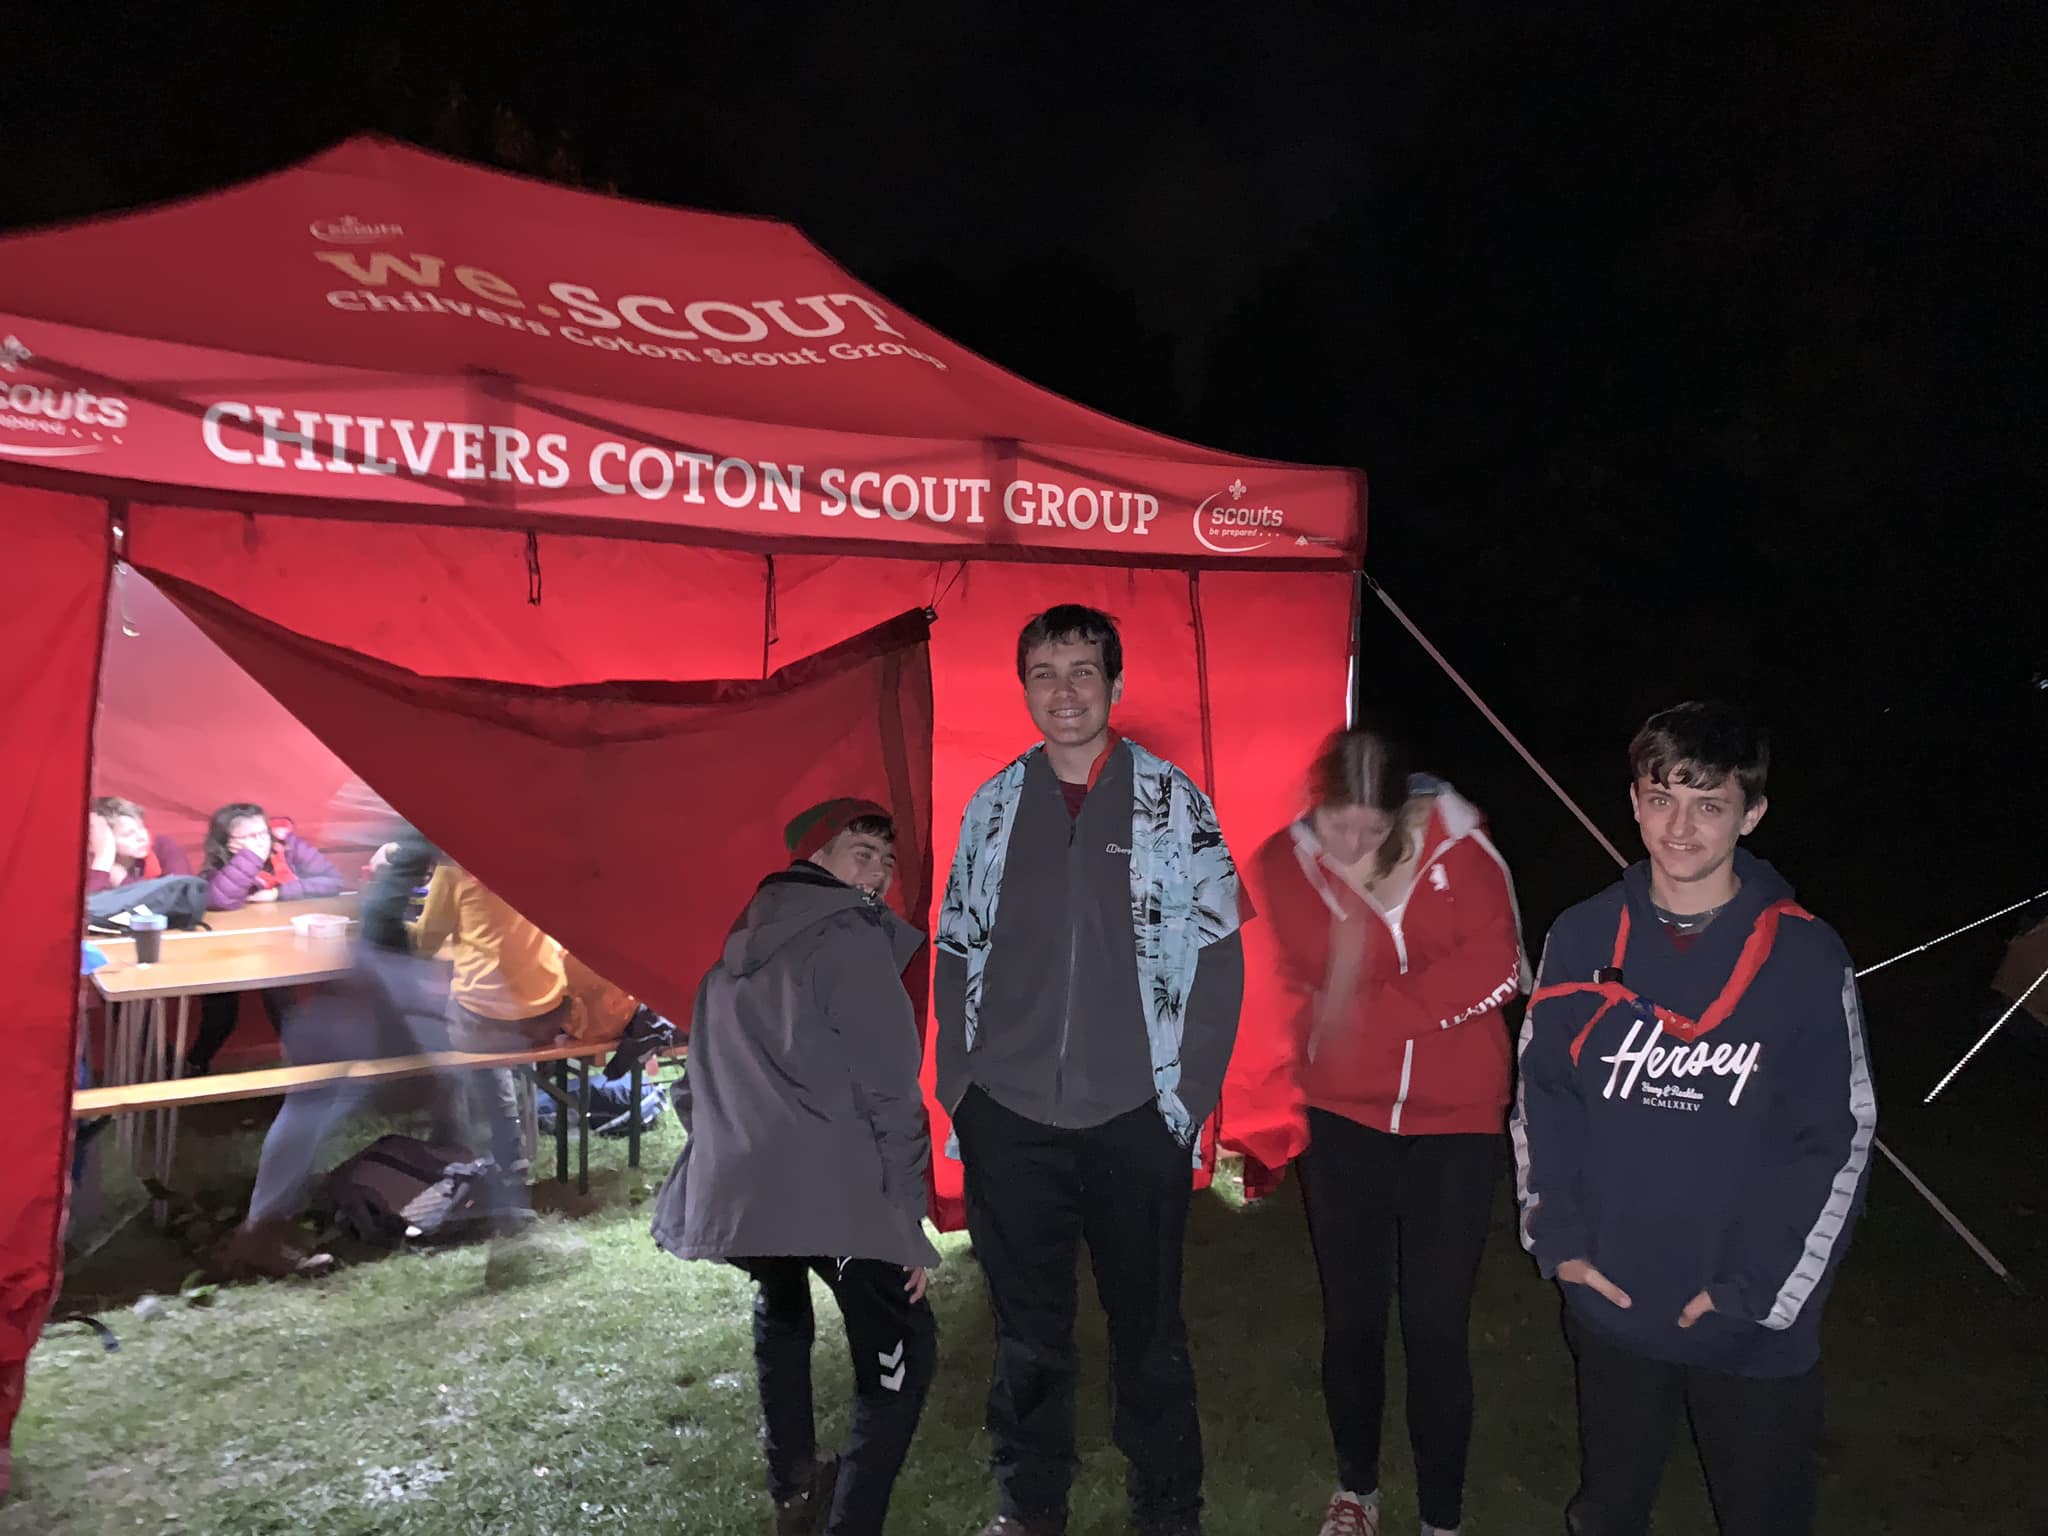 Chilvers Coton Scout Group